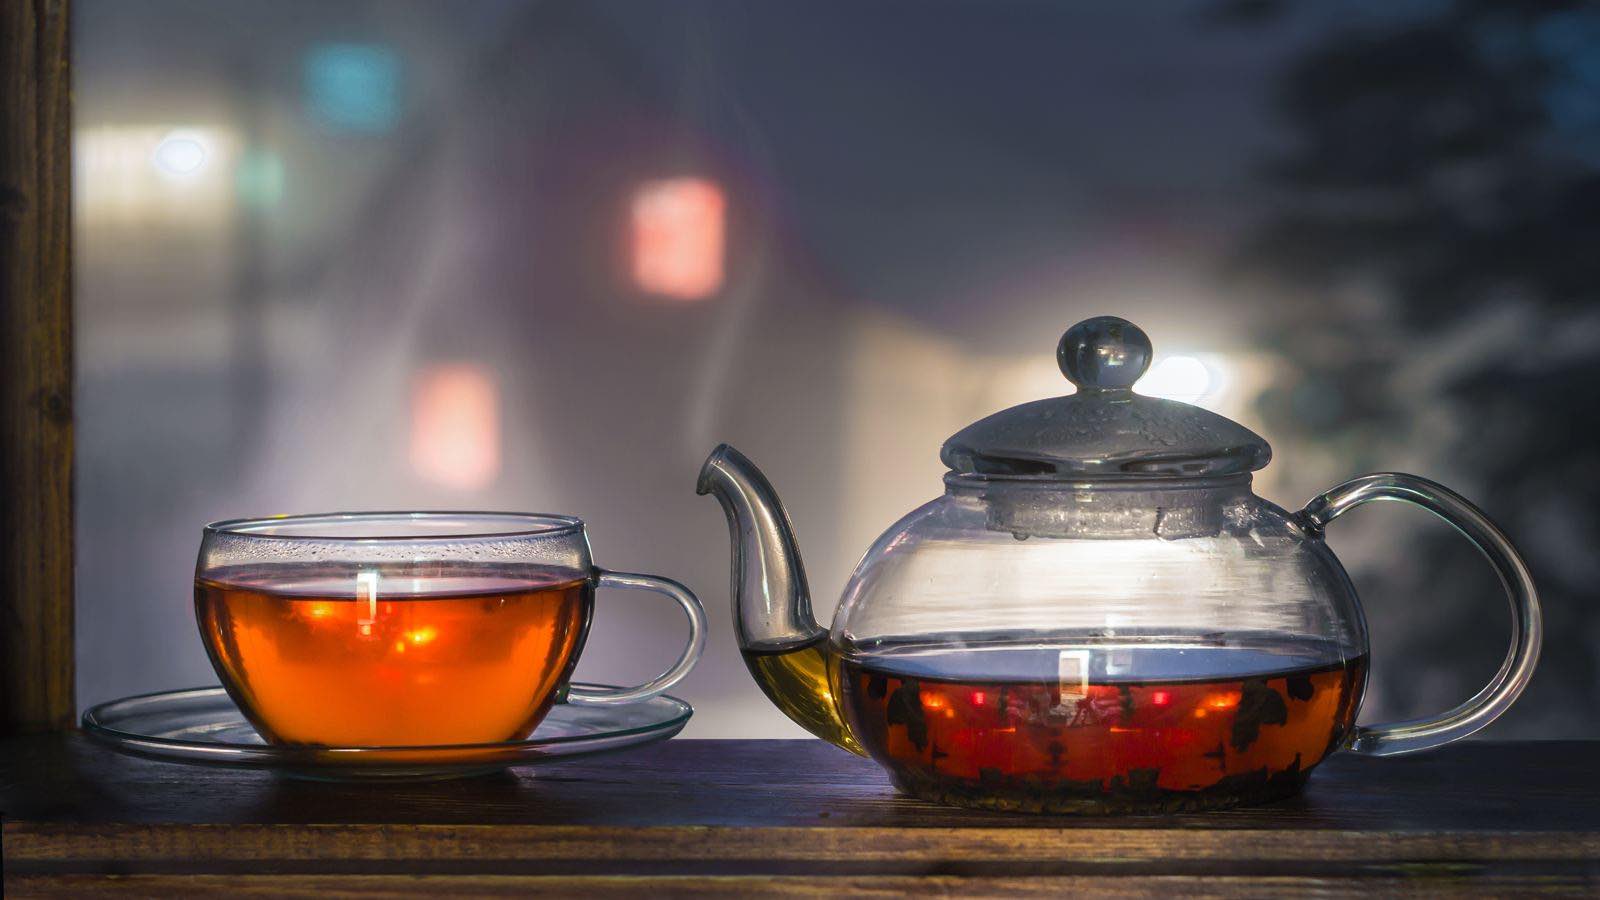 A cup of tea matters your health